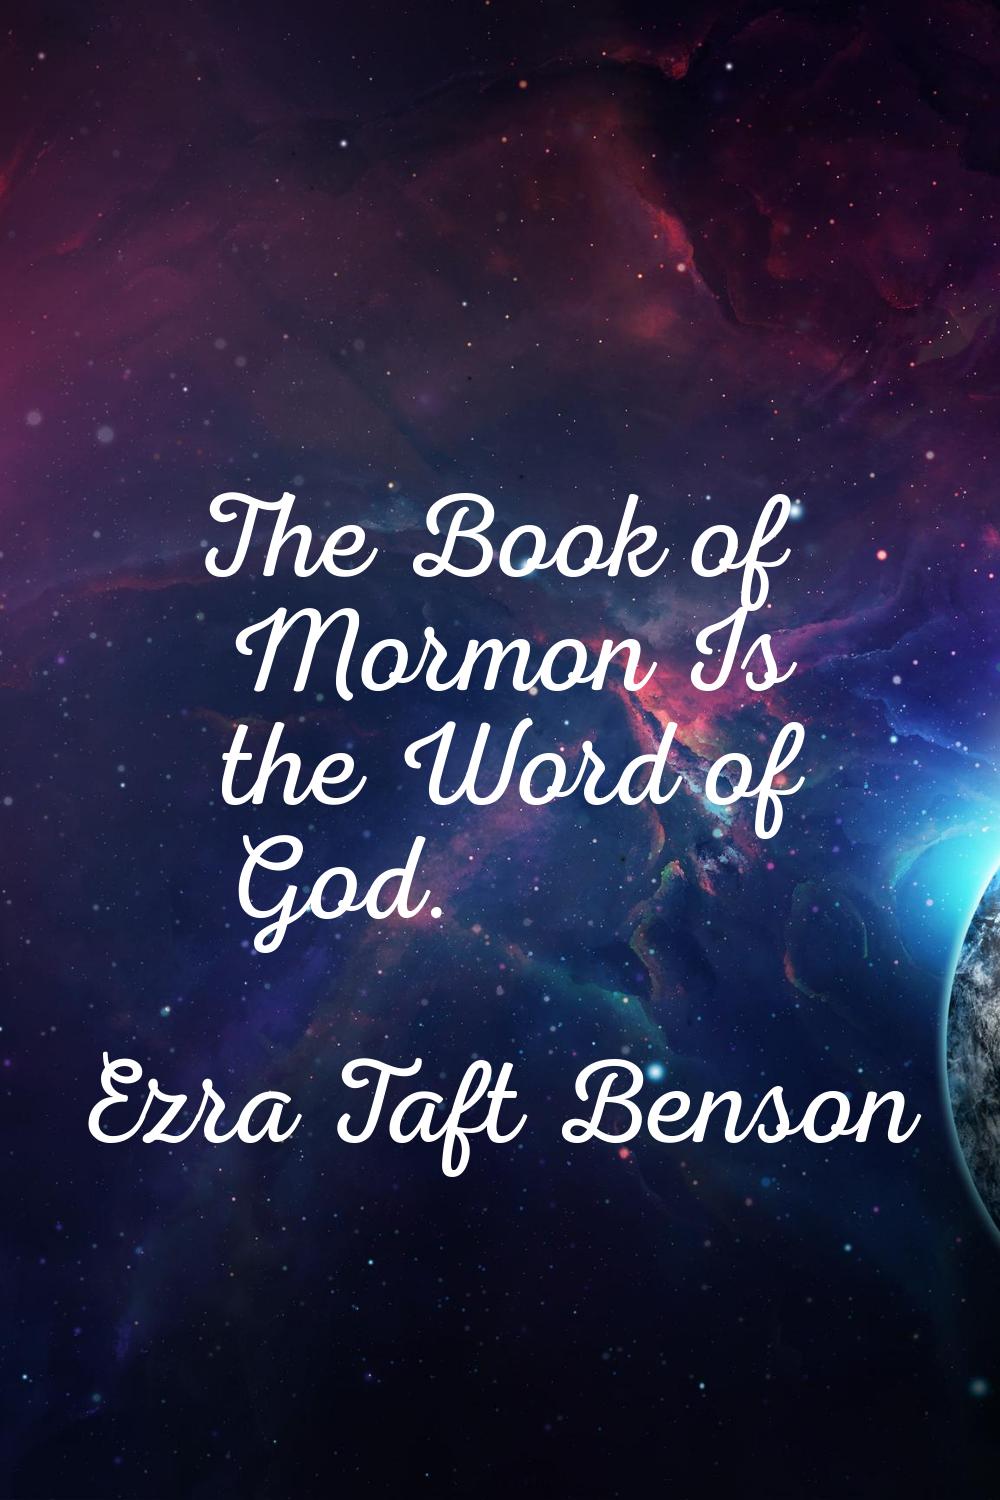 The Book of Mormon Is the Word of God.